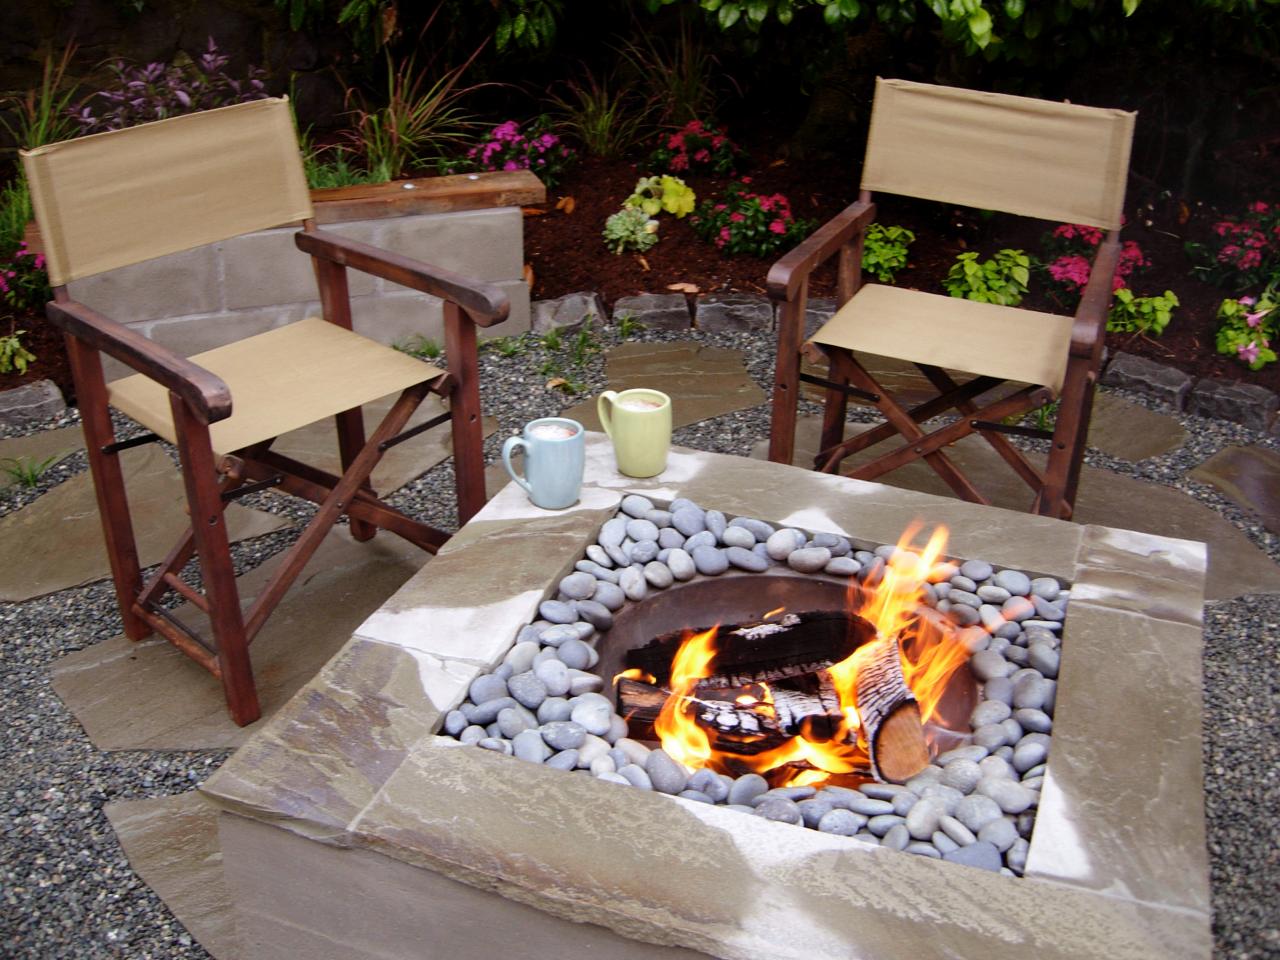 How To Make A Concrete Fire Feature, Make Your Own Portable Fire Pit